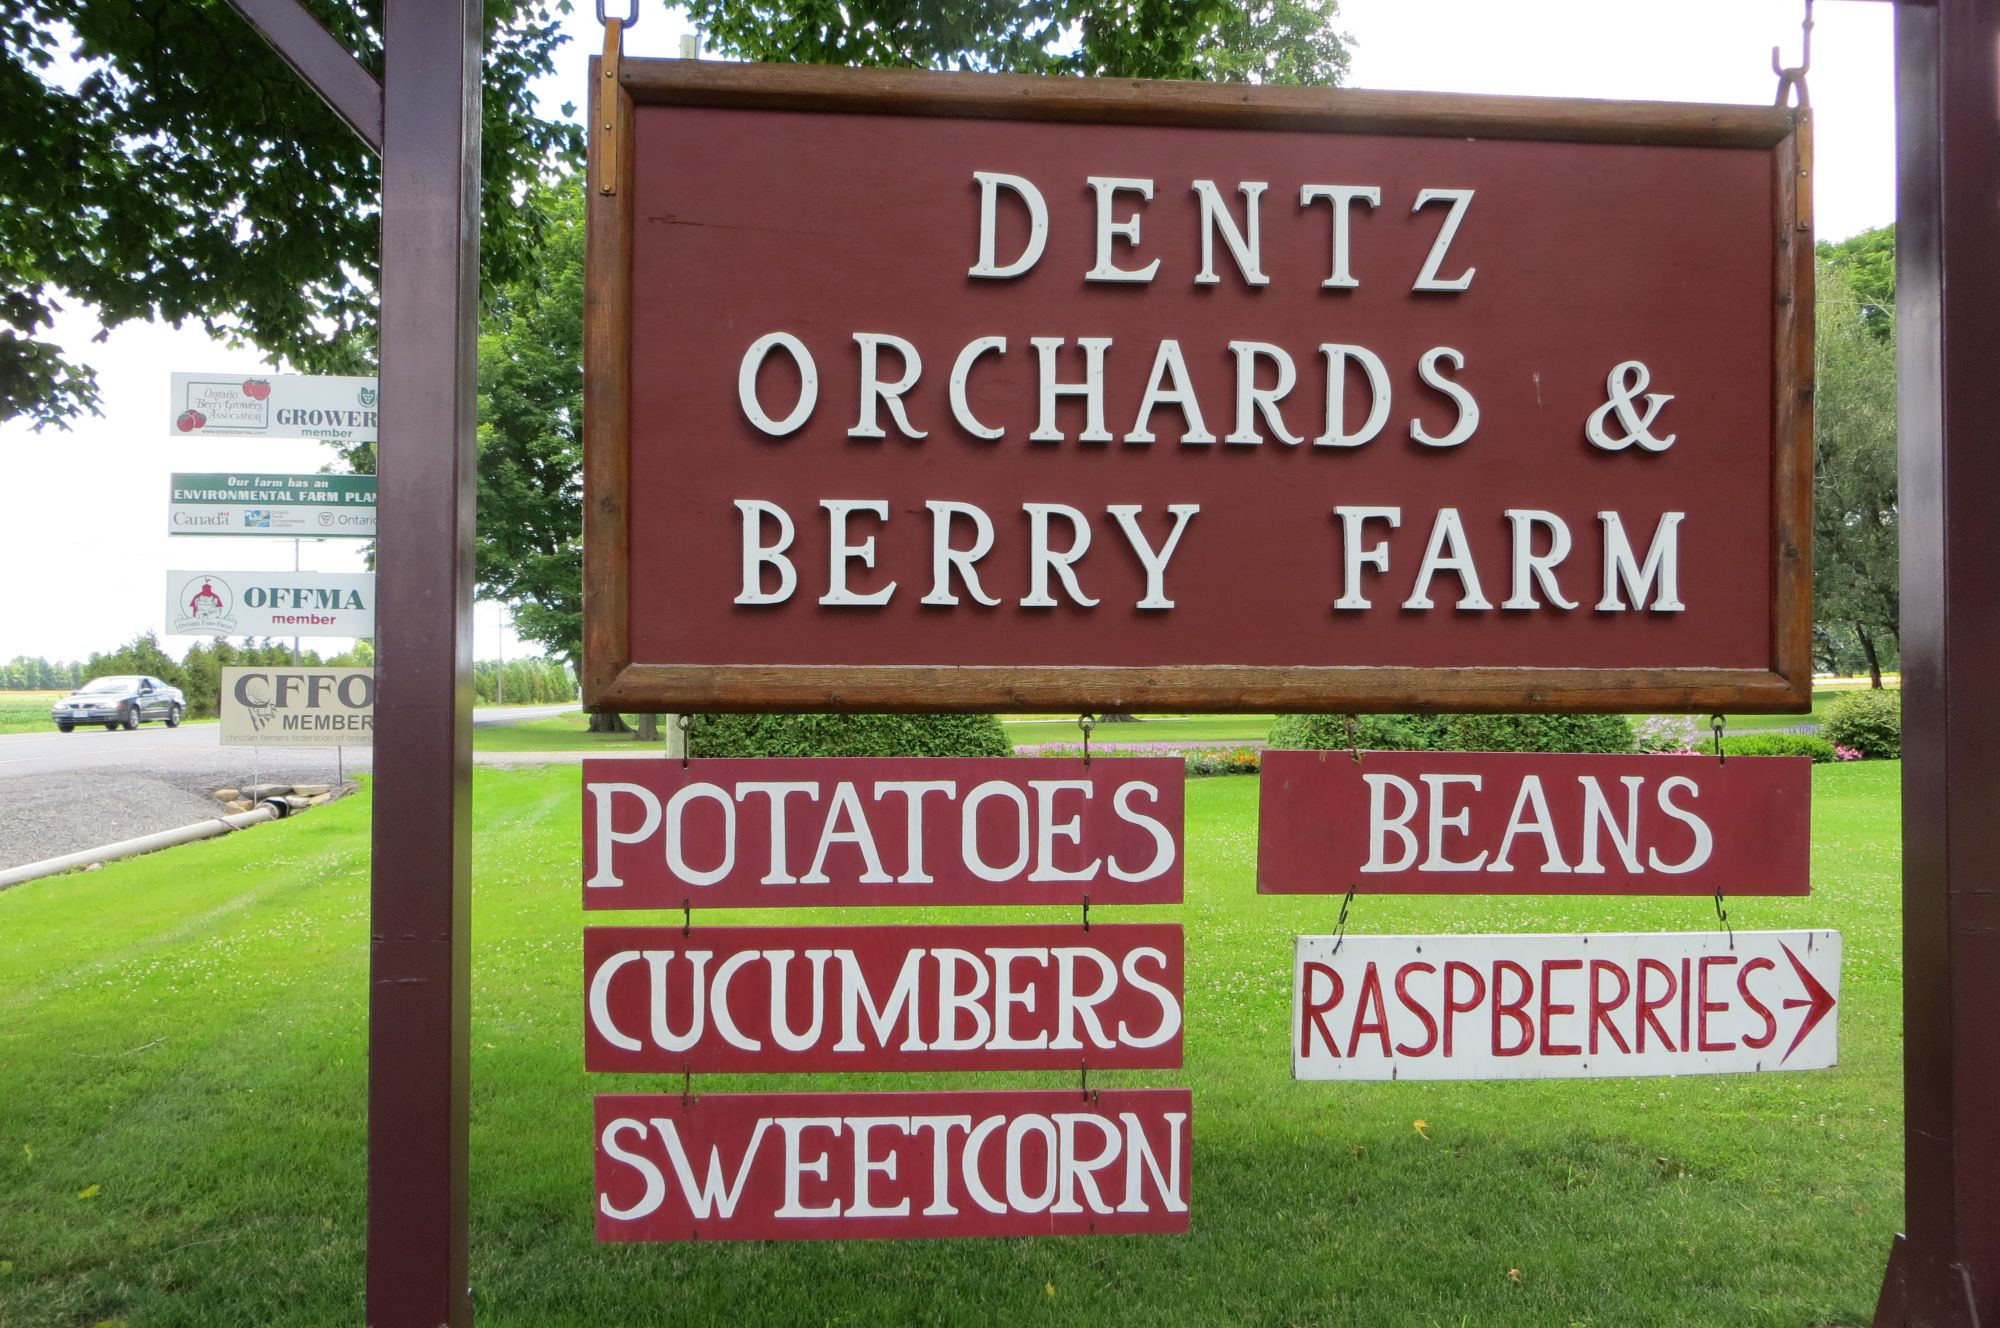 Connect with Dentz Orchards and Berry Farm on the Web